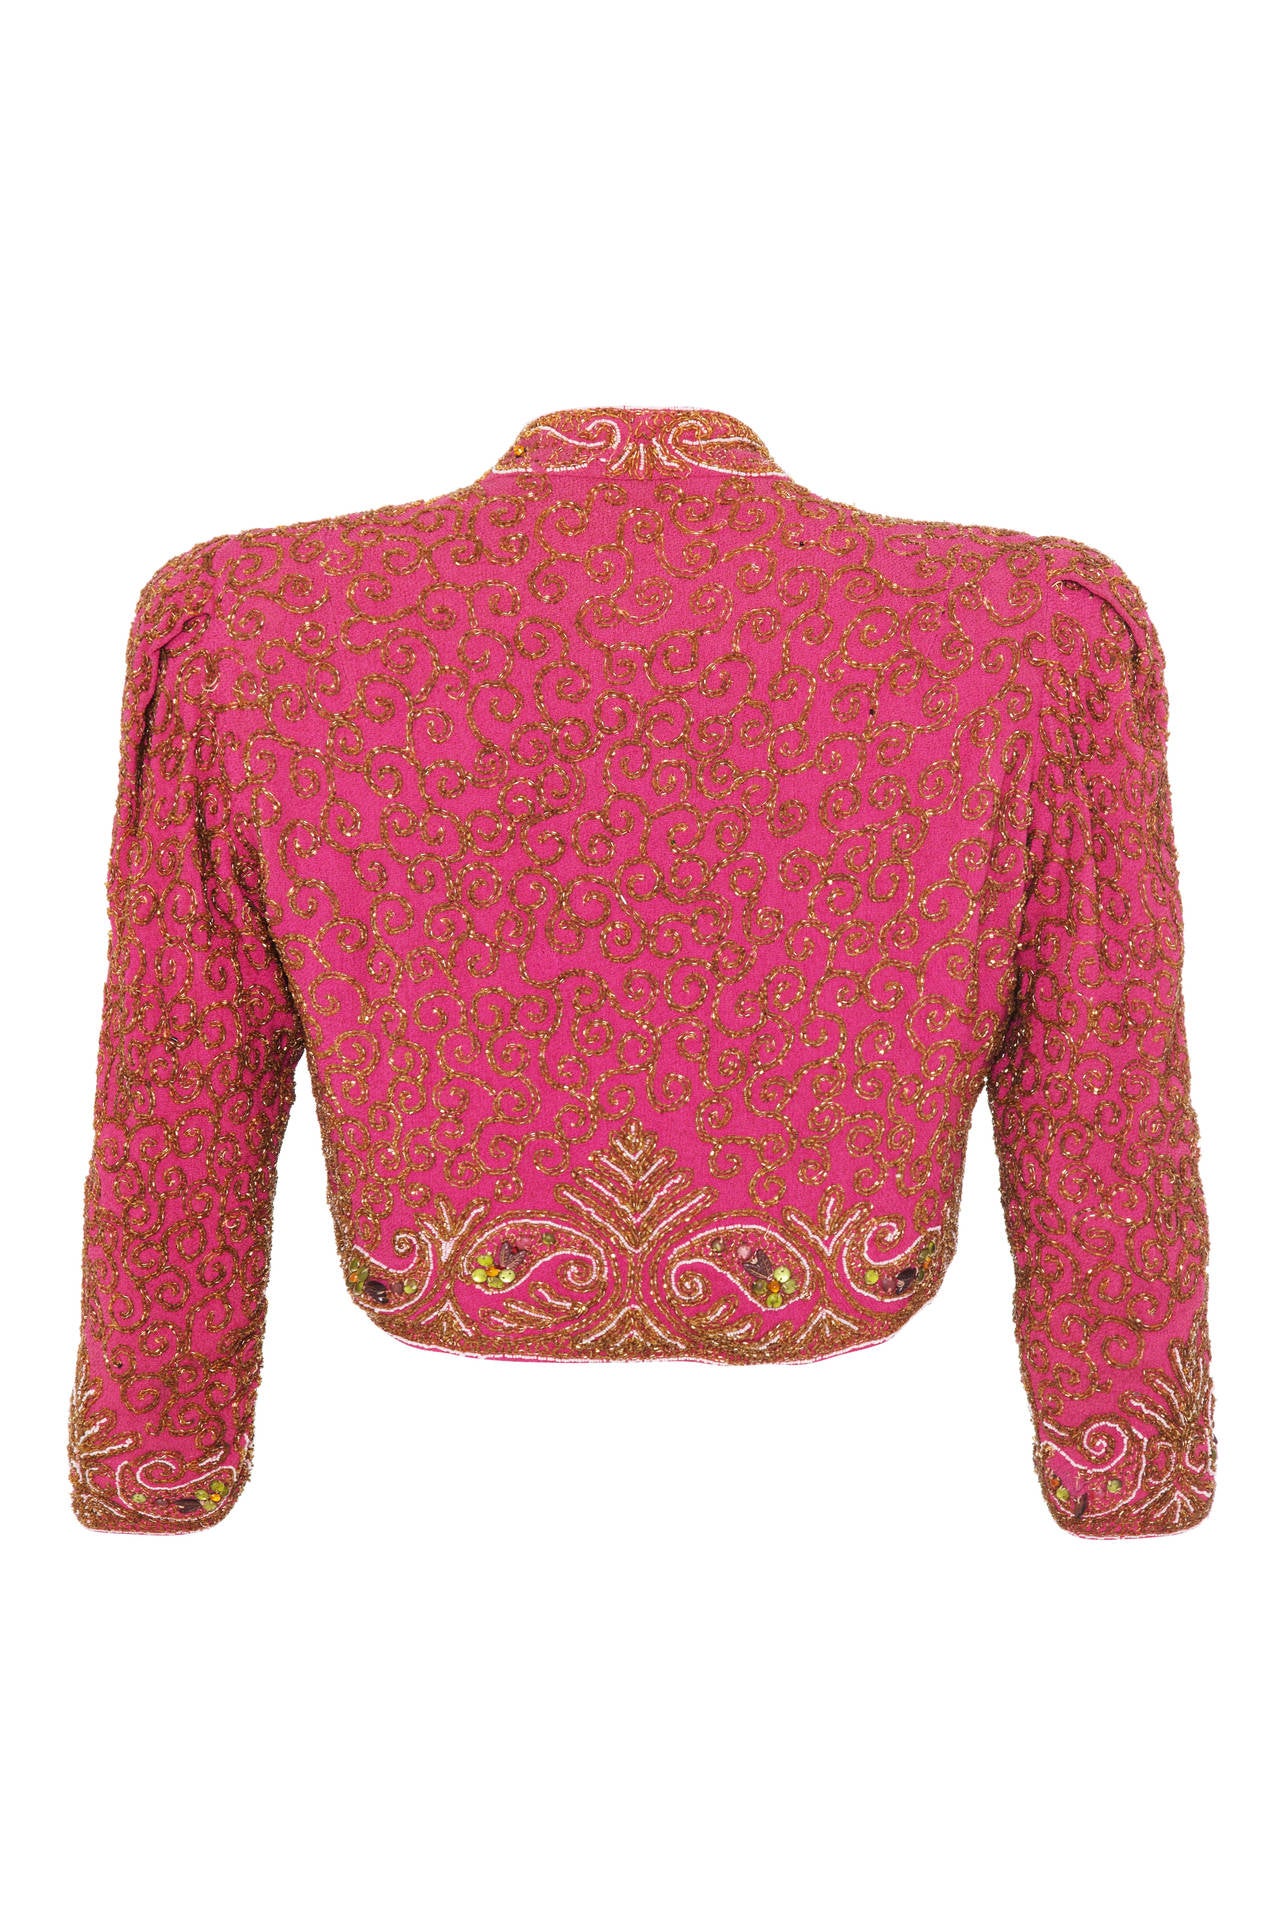 Exquisite pink silk bolero jacket from the late 1930s/ early 1940s with intricate gold beading throughout.  This piece has hook and eyes to fasten at the front and is in excellent condition for something of this age with no missing beads.  It has